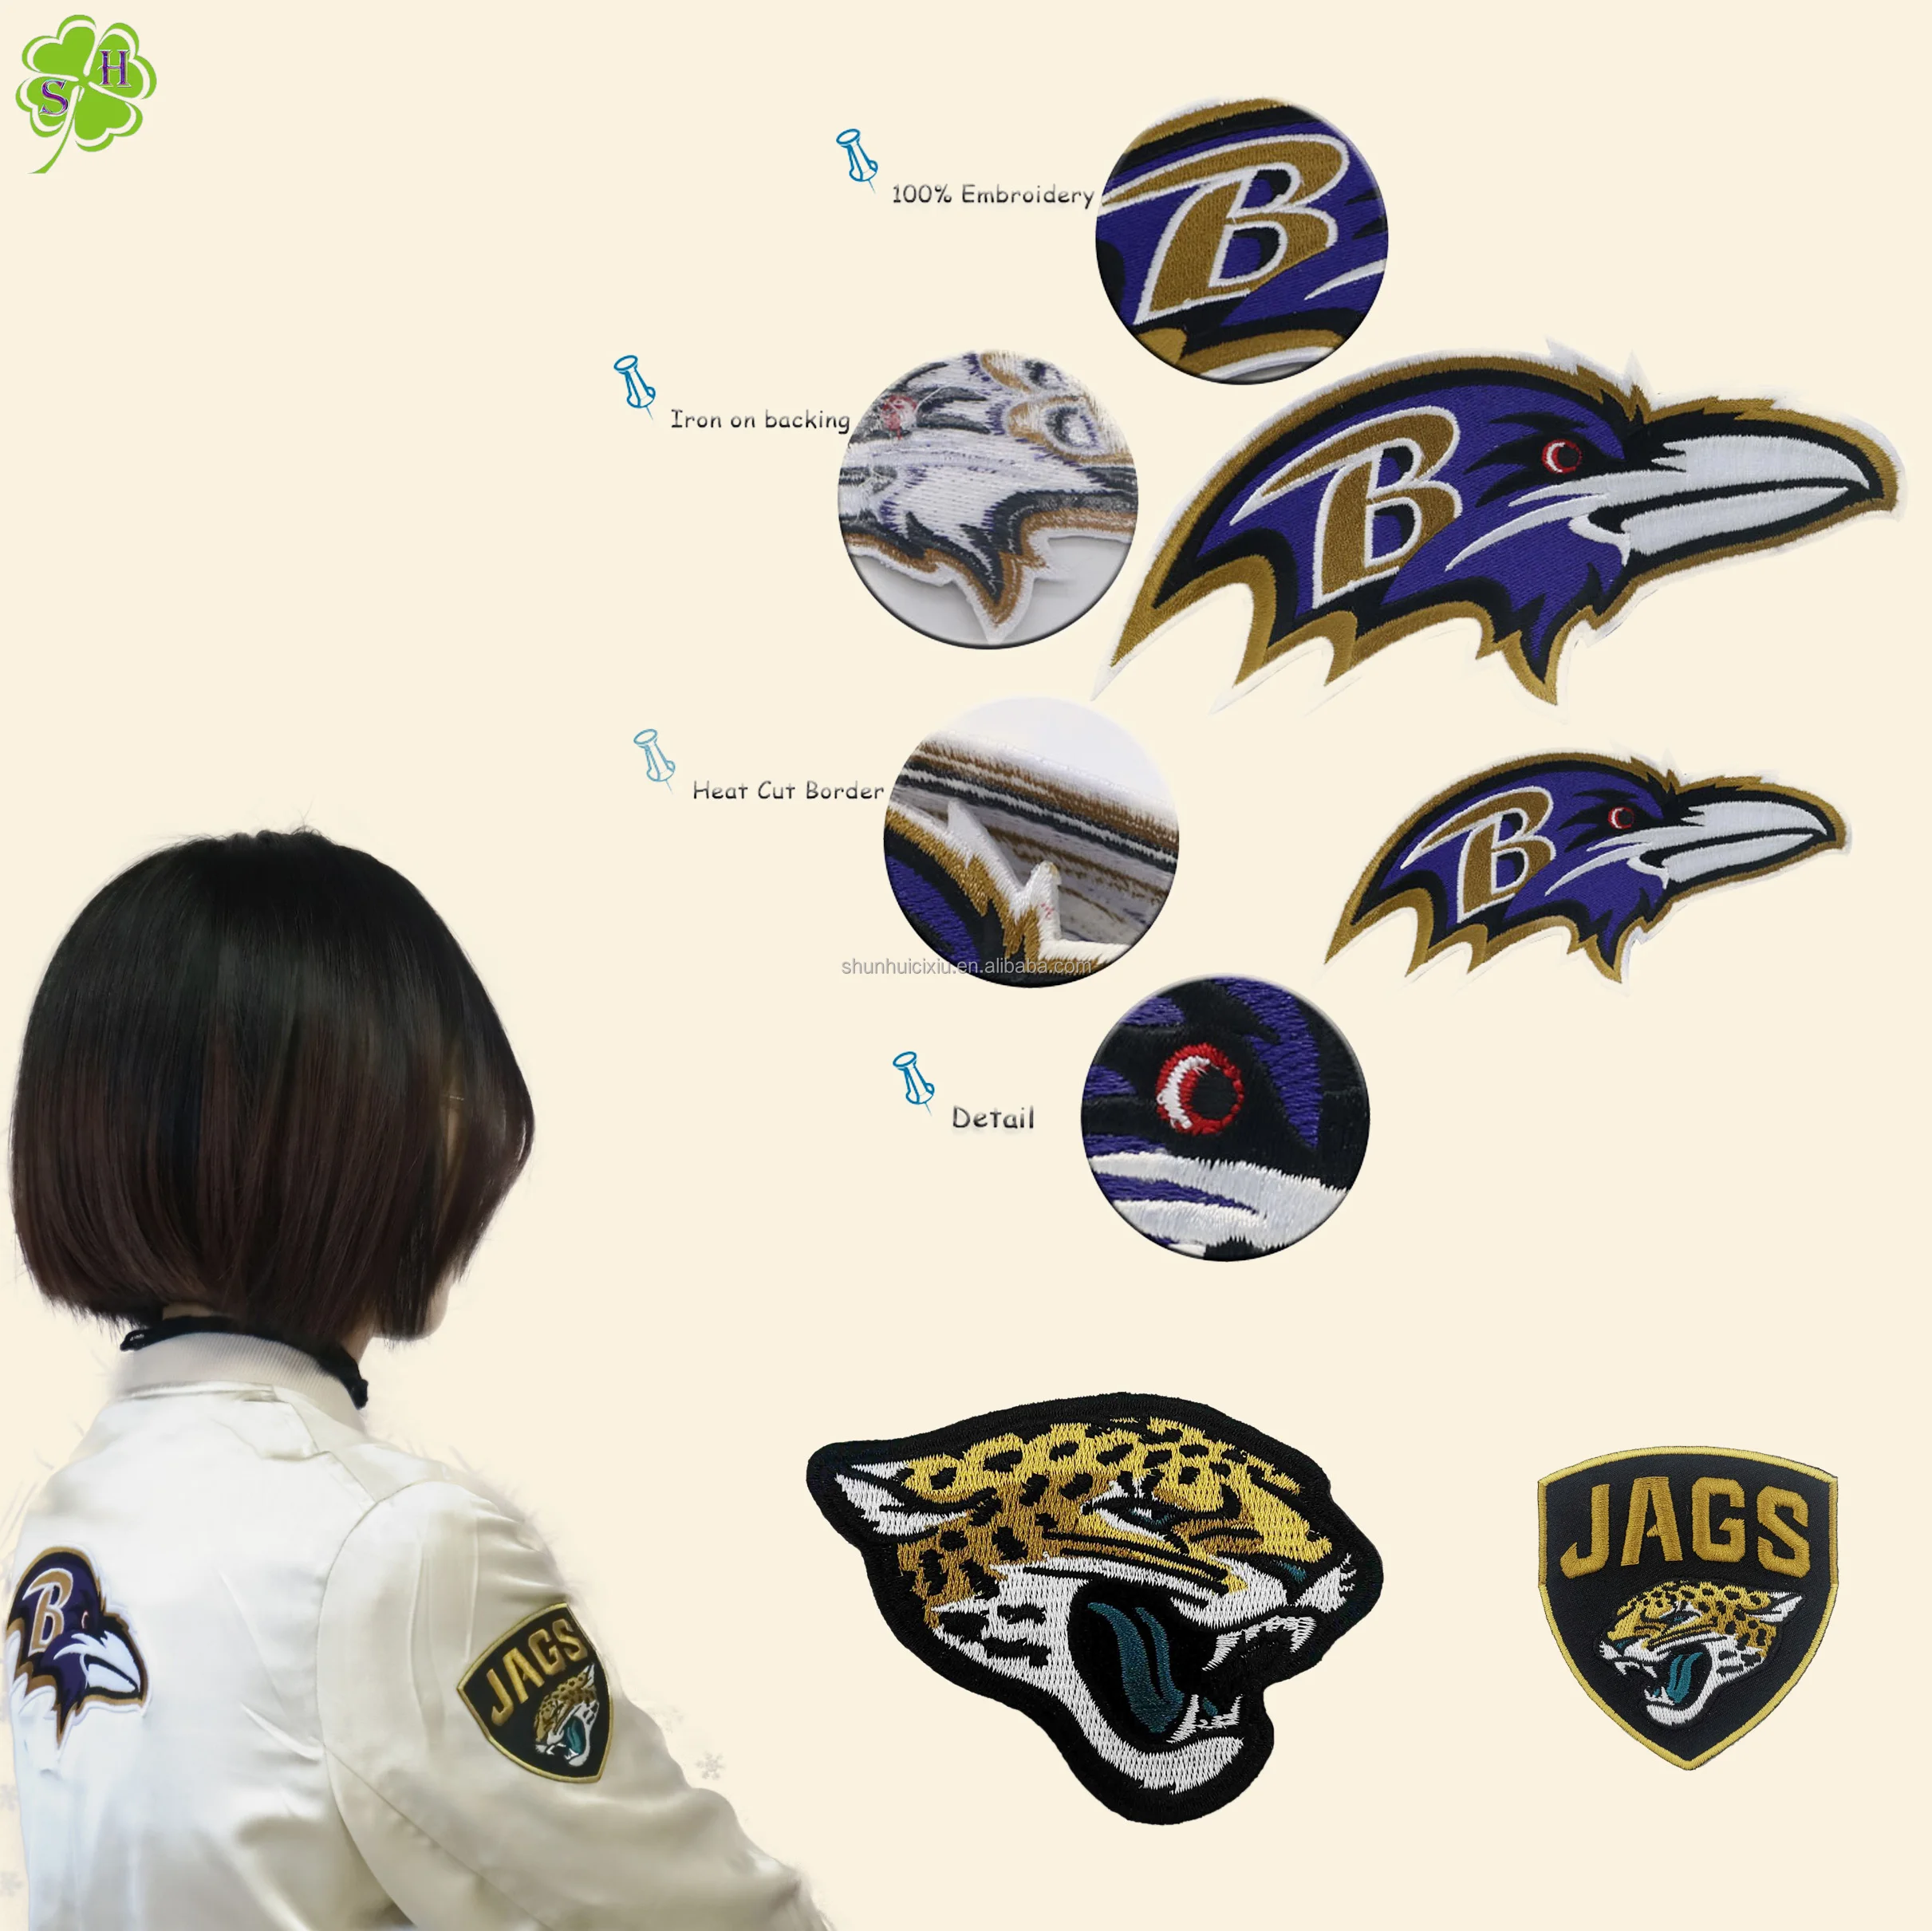 (Large Size) Siam Accs Rugby Fans Philadelphia Patch Embroidery (White) for American Football Fan Favorite Team Iron on Sew on Embroidered Patch